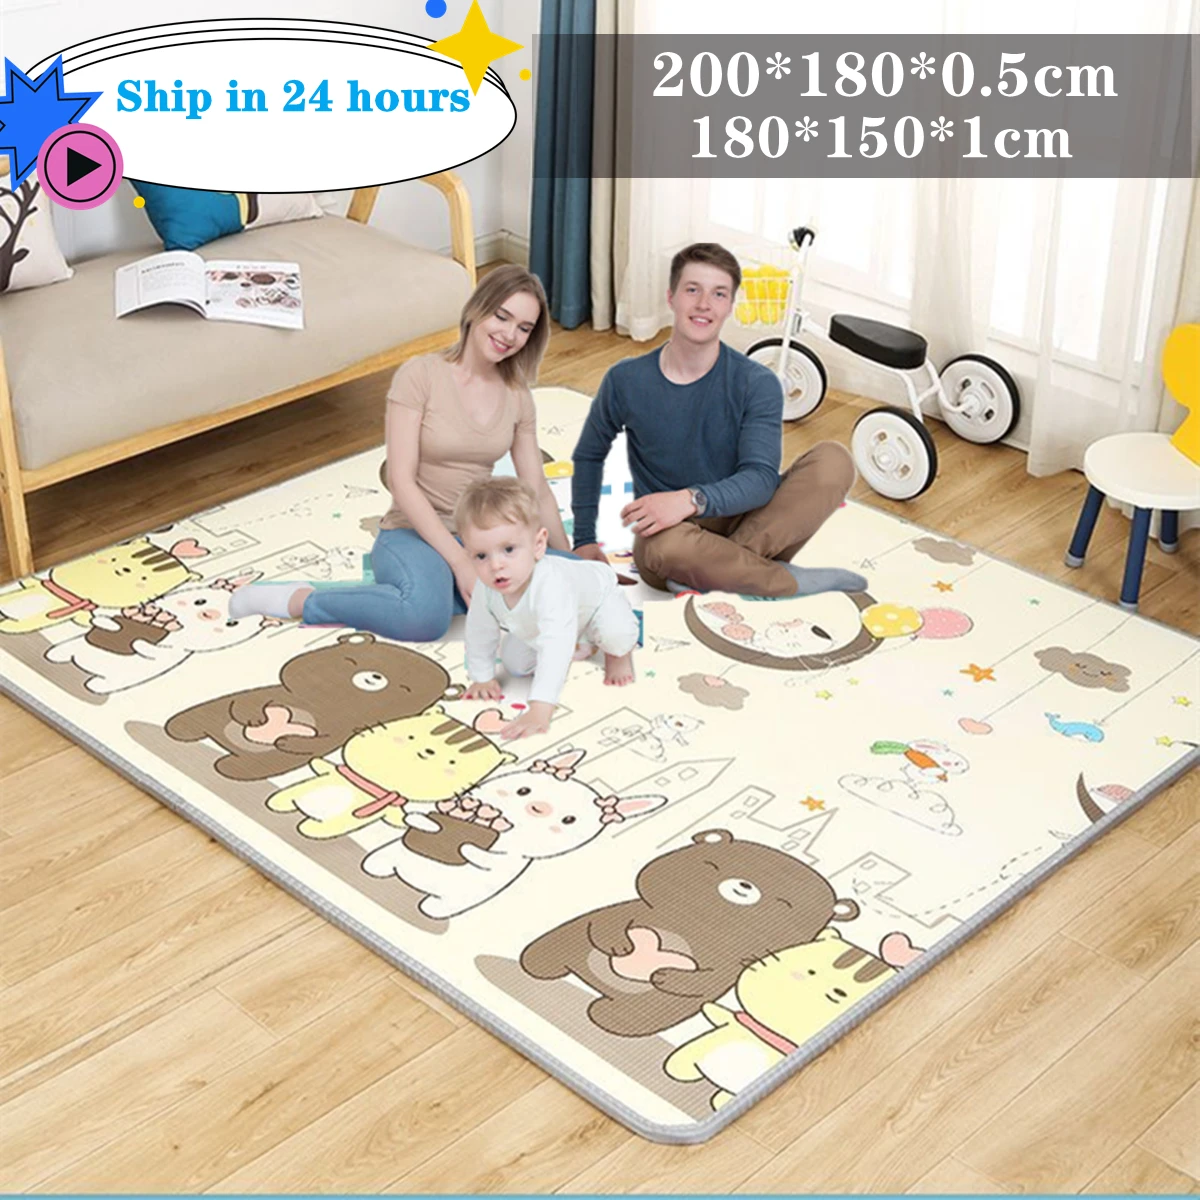 Non-toxic Thick 1CM EPE Baby Activity Gym Baby Crawling Play Mats Folding Mat Carpet Baby Game Mat for Children's Safety Mat Rug miamumi baby play mat activity gym carpet for child 200x180cm 78x70in alphabet dinosaur animal thick xpe rug waterproof folding